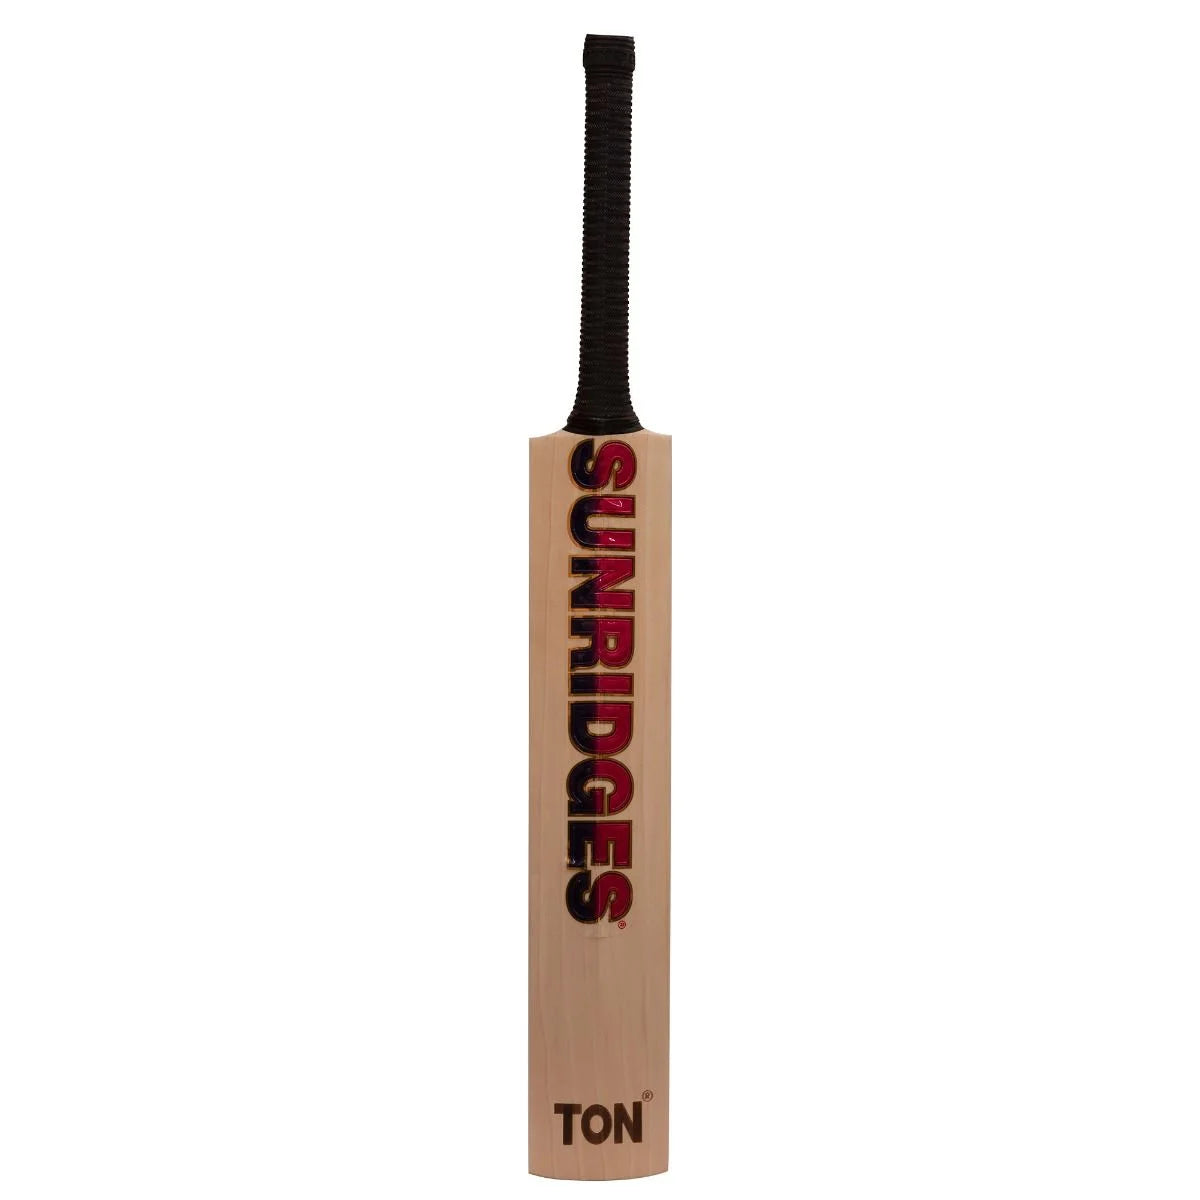 SS VINTAGE FINISHER 7 ENGLISH WILLOW CRICKET BAT 2023